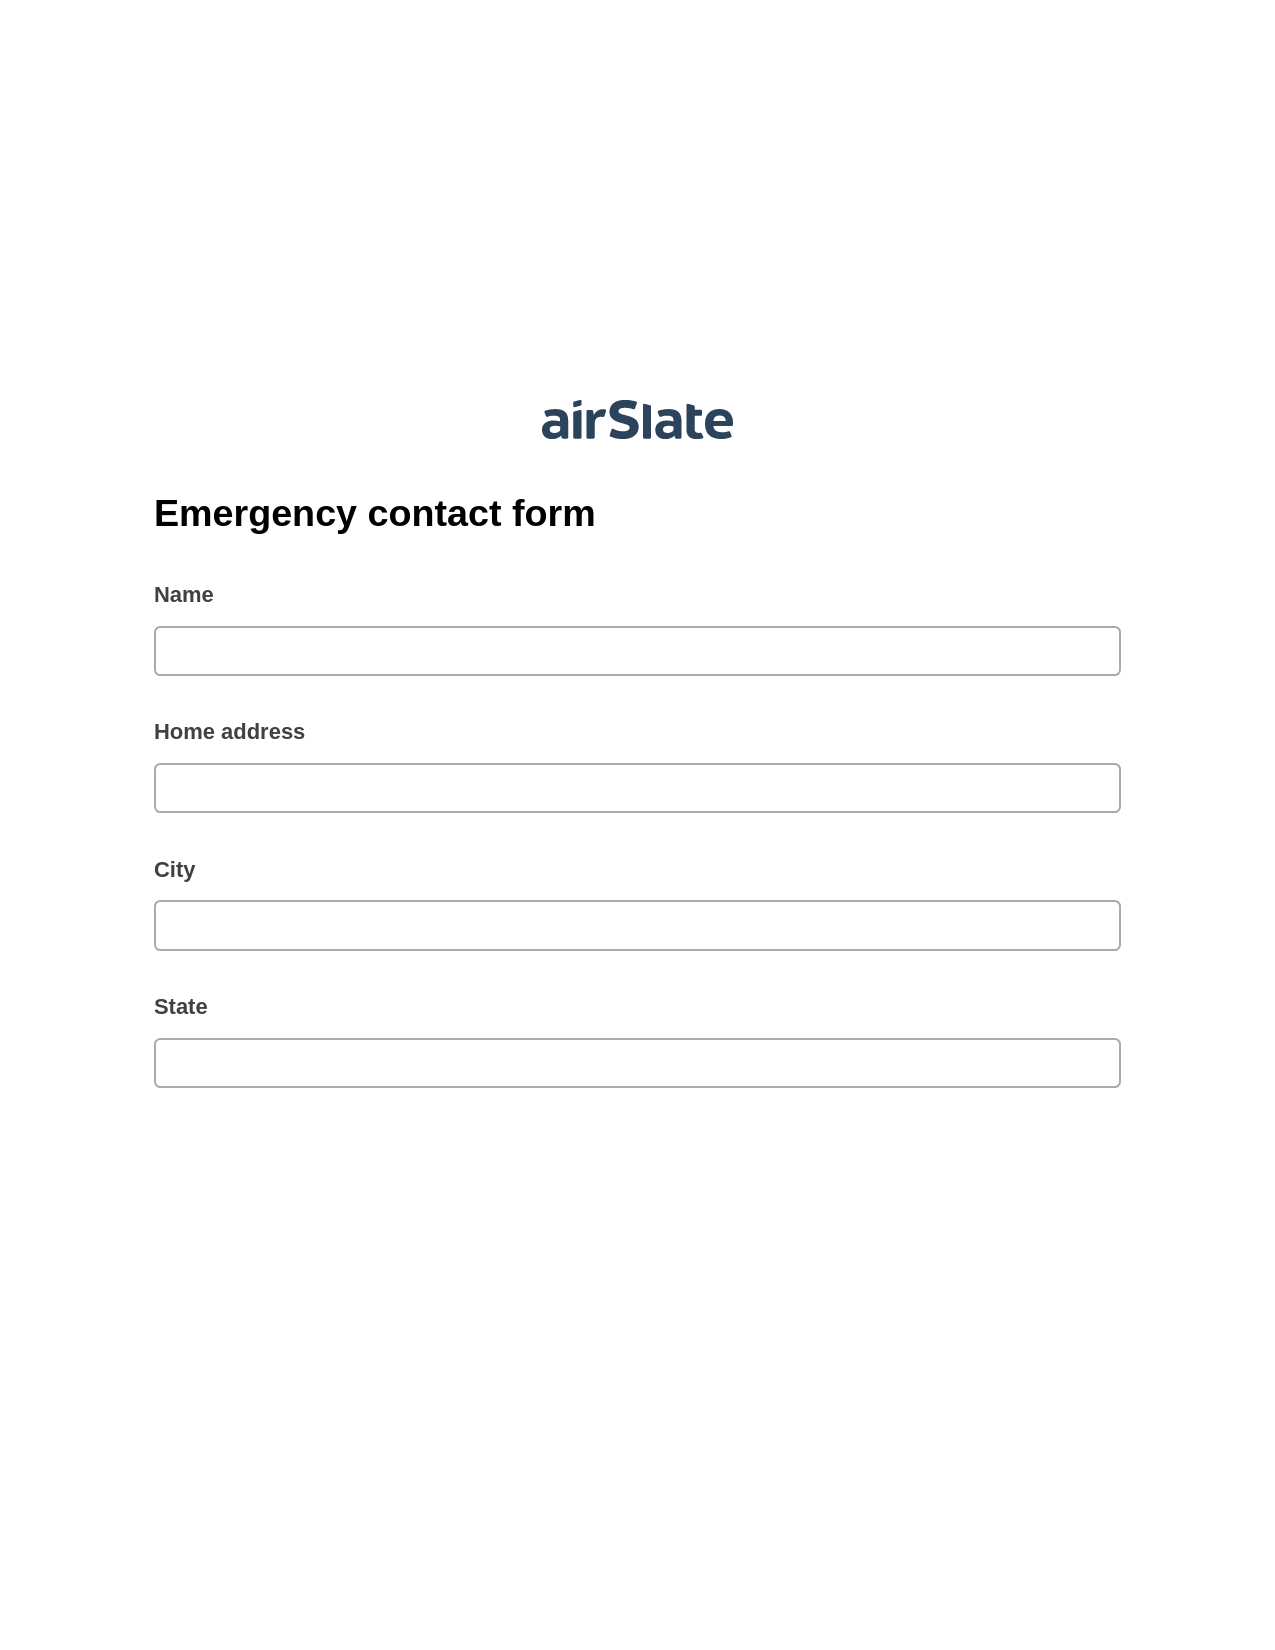 Emergency contact form Pre-fill Dropdown from Airtable, SendGrid send Campaign bot, Google Drive Bot